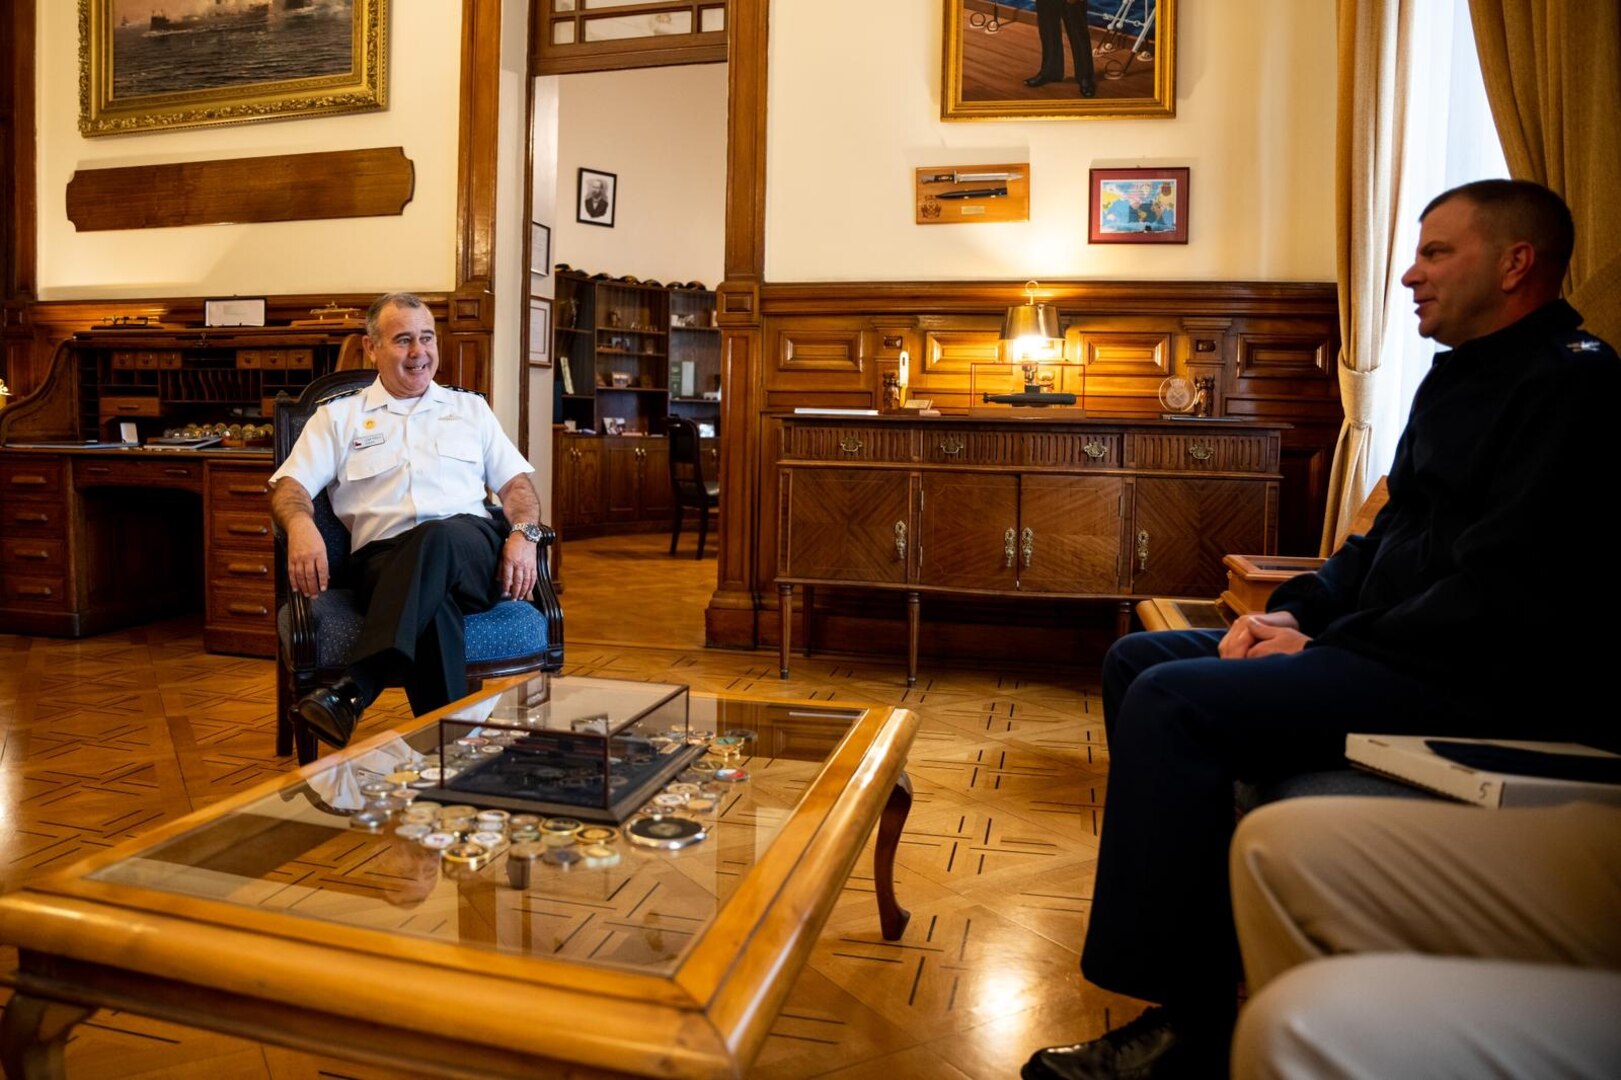 Chilean Navy Rear Adm. Juan Zúñiga, Commander of the First Naval Zone, and U.S. Coast Guard Capt. Keith Ropella, Commanding Officer of Coast Guard Cutter POLAR STAR (WAGB 10) converse in the Headquarters of the First Naval Zone, Valparaíso, Chile, March 20, 2023. Chile and U.S. have a deep and enduring military and scientific collaboration, particularly as Chile and U.S. celebrate 200 years of diplomatic relations. (U.S. Coast Guard photo by Petty Officer 3rd Class Aidan Cooney)